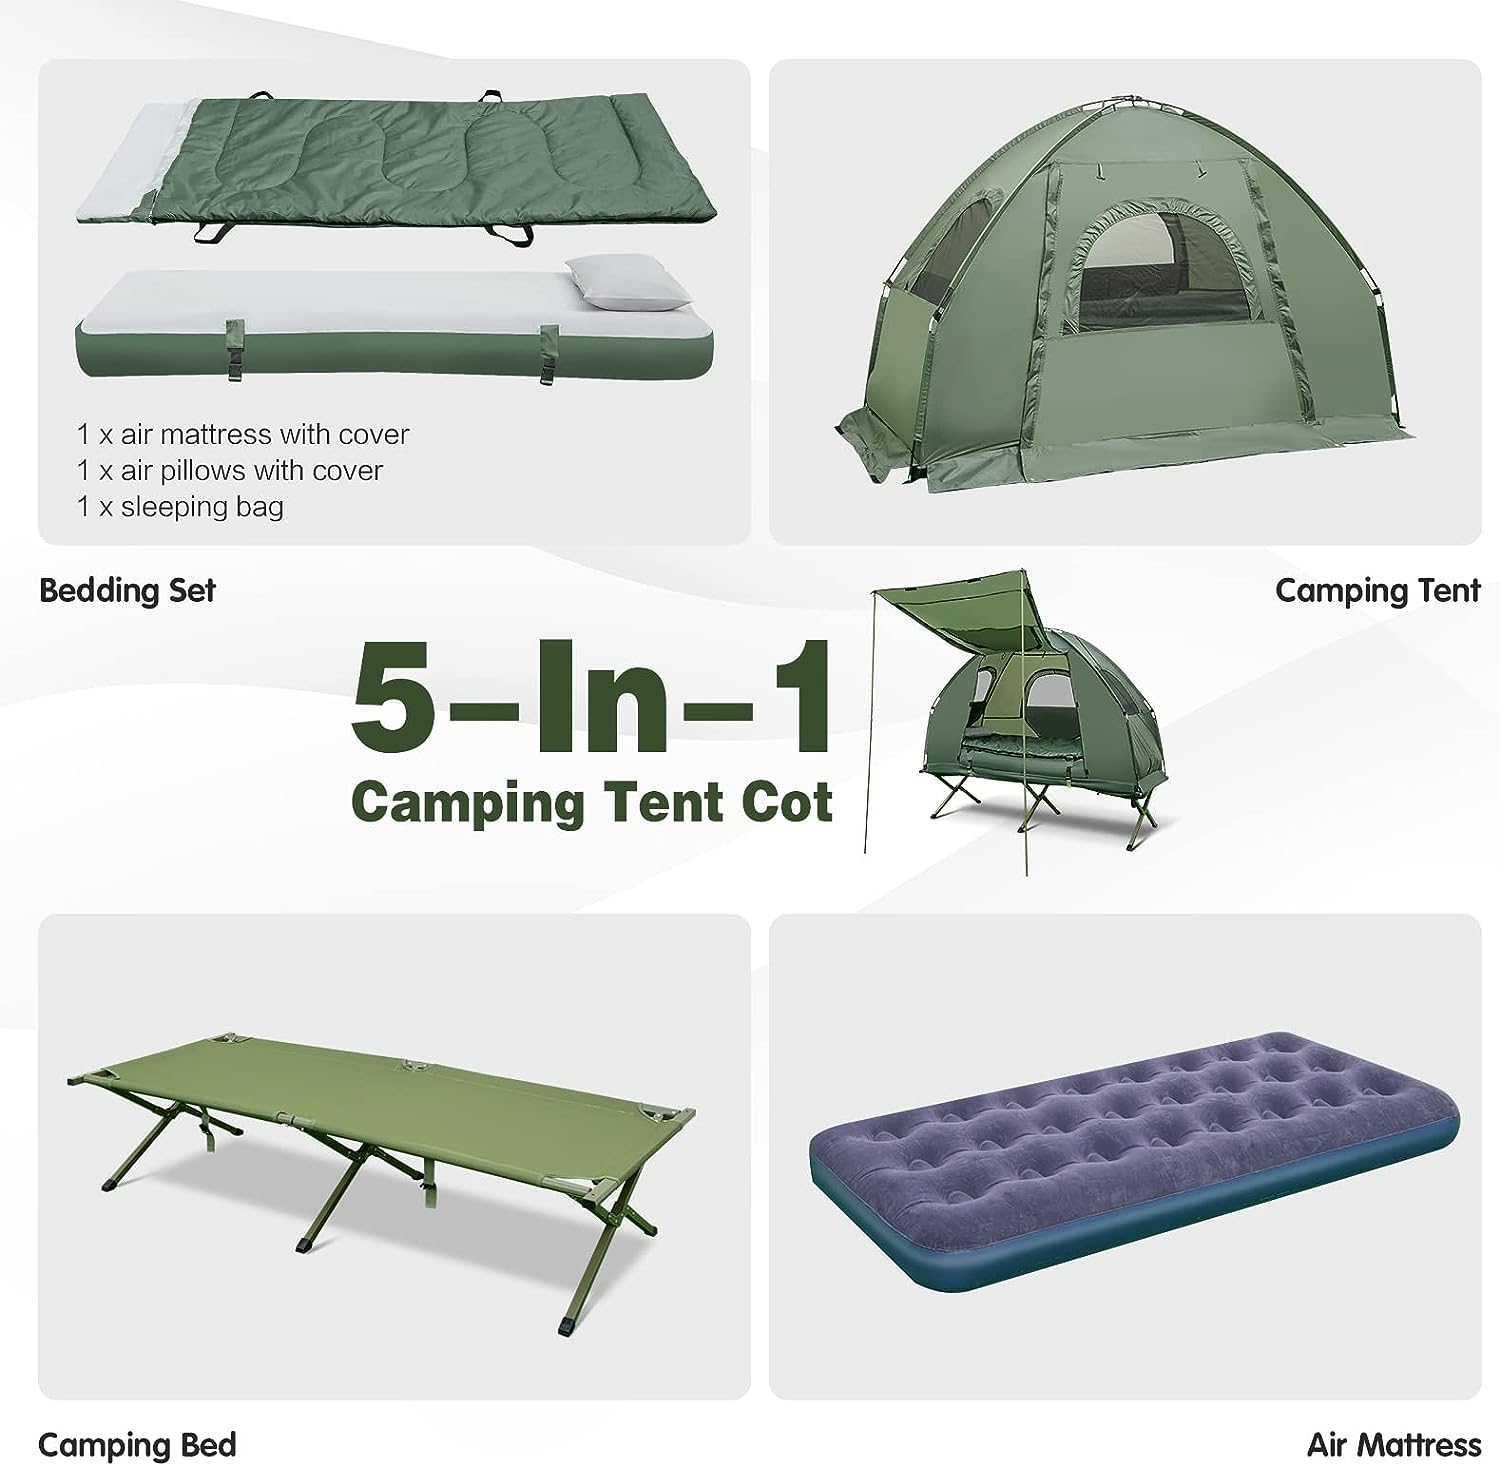 nightcore 1 person cot tent camping bed air mattress